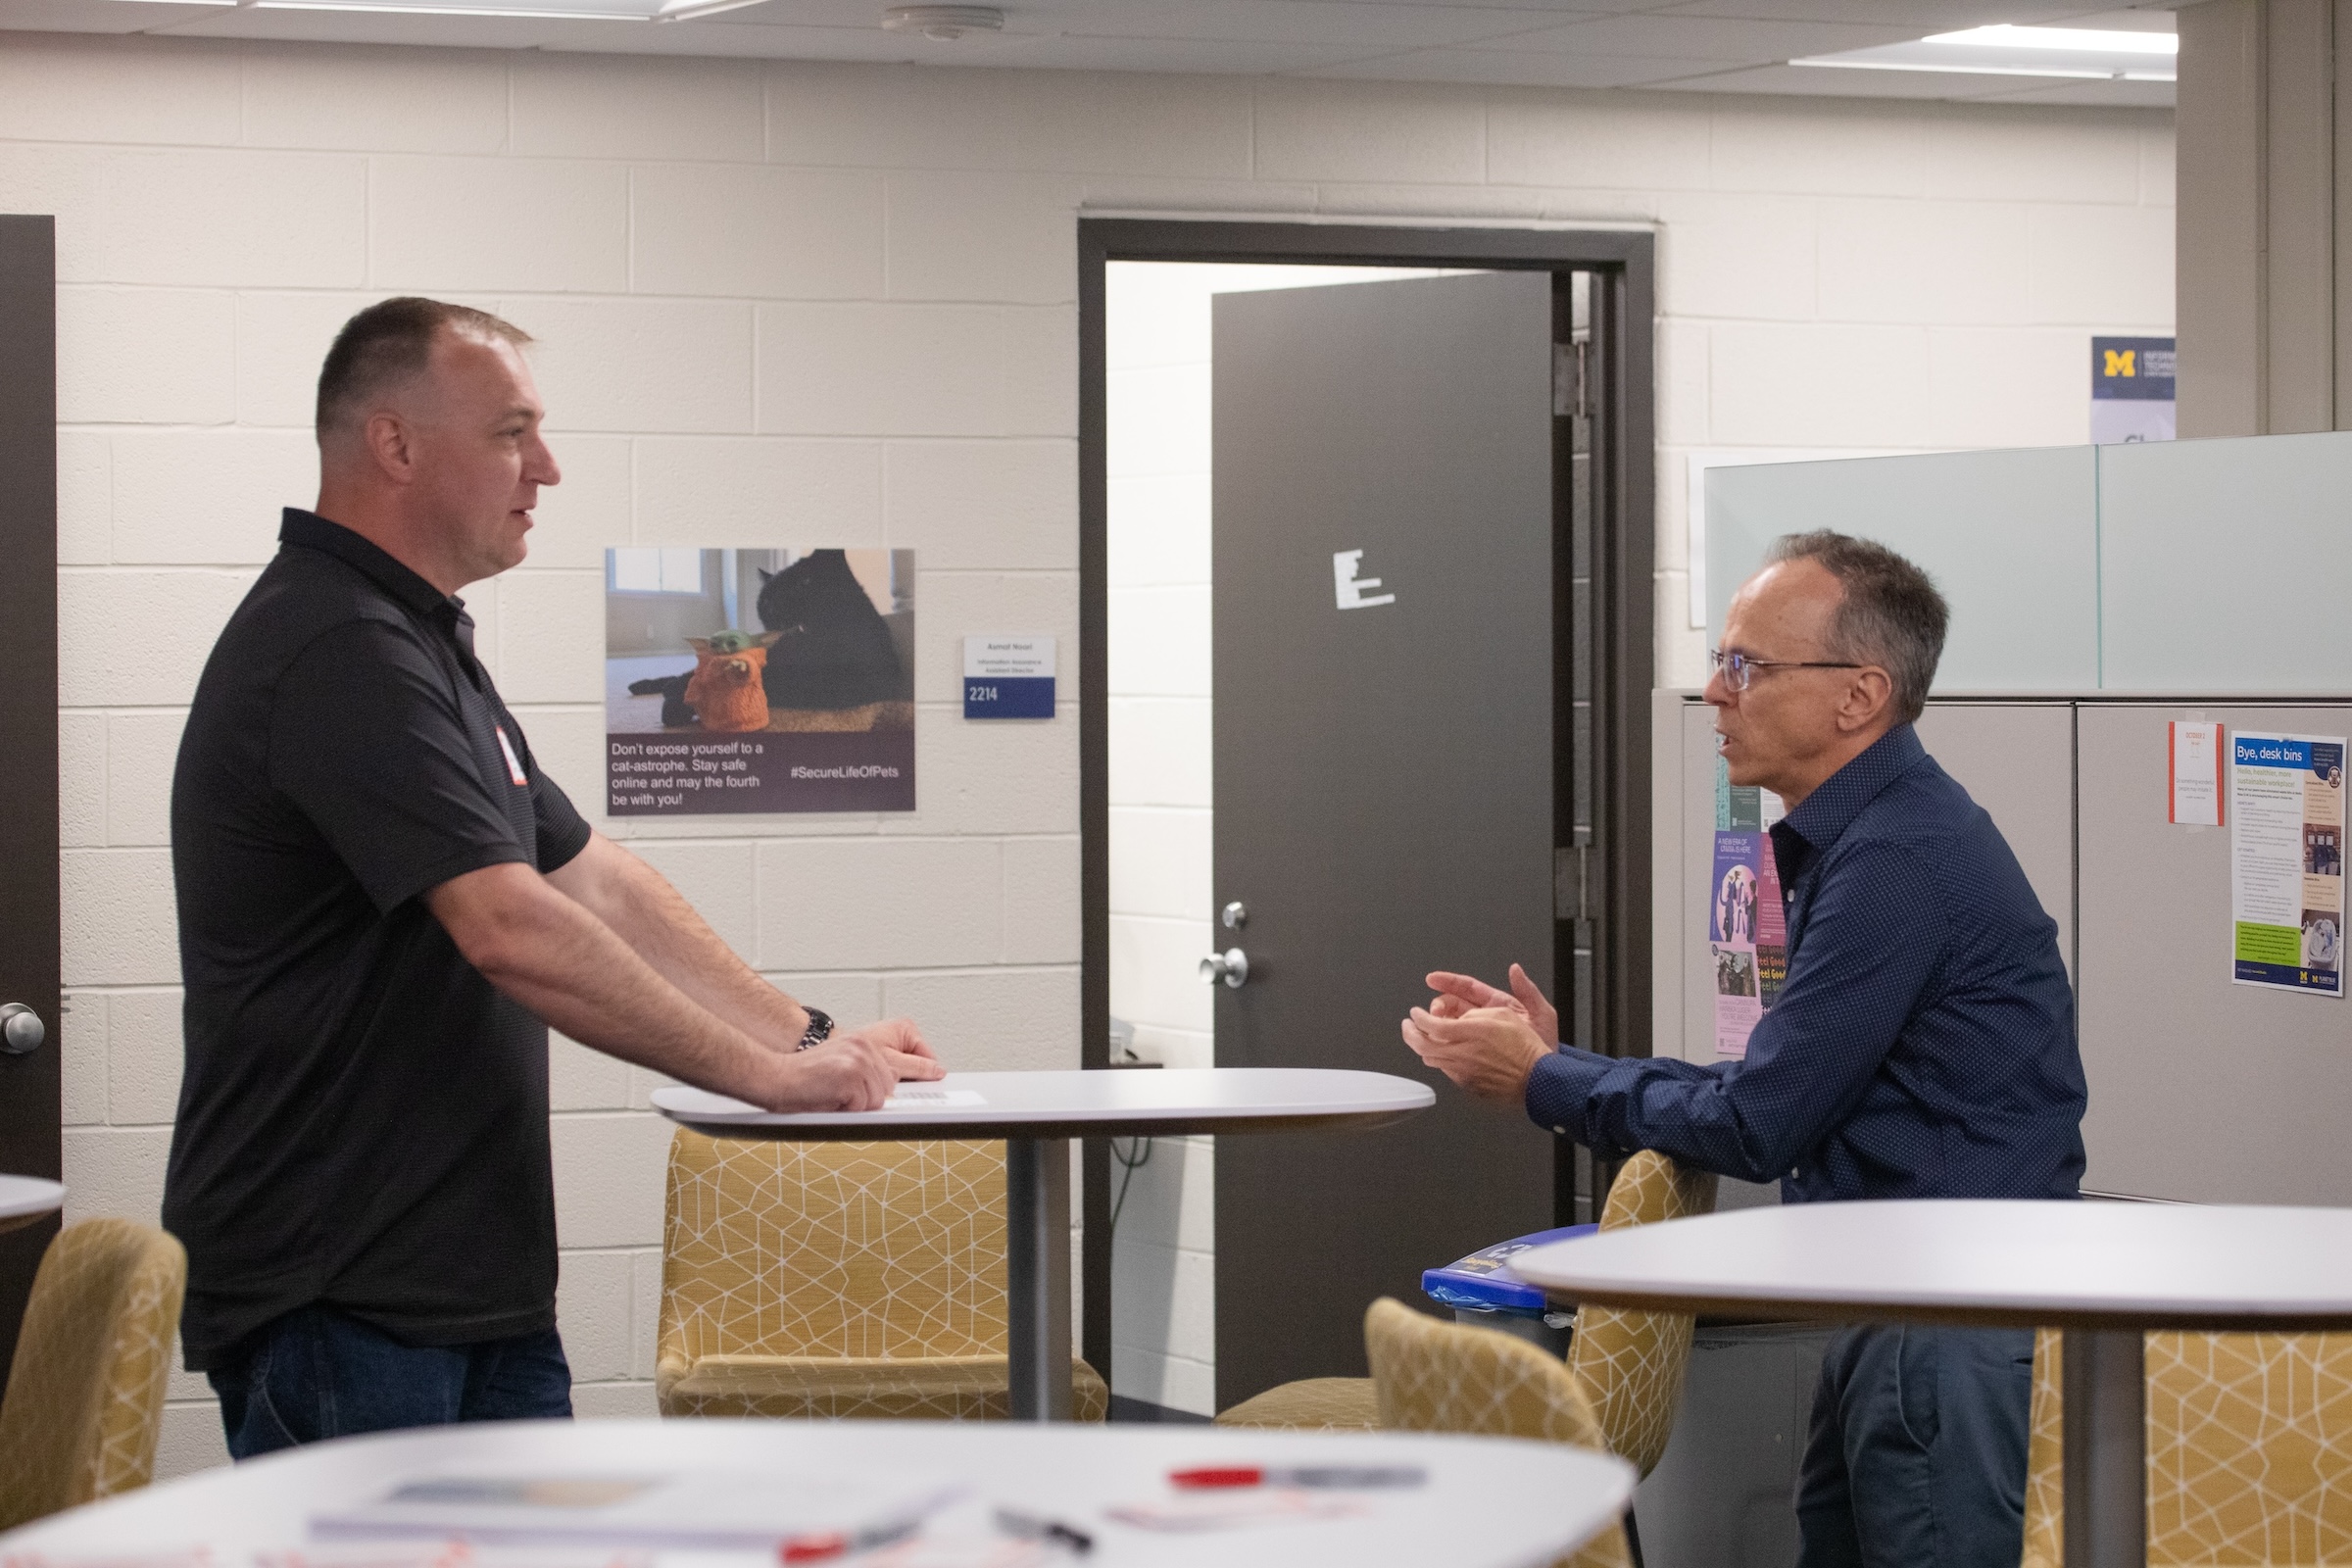 2 men have a discussion across a small round table. One is standing and one is sitting. They are both wearing navy blue shirts.